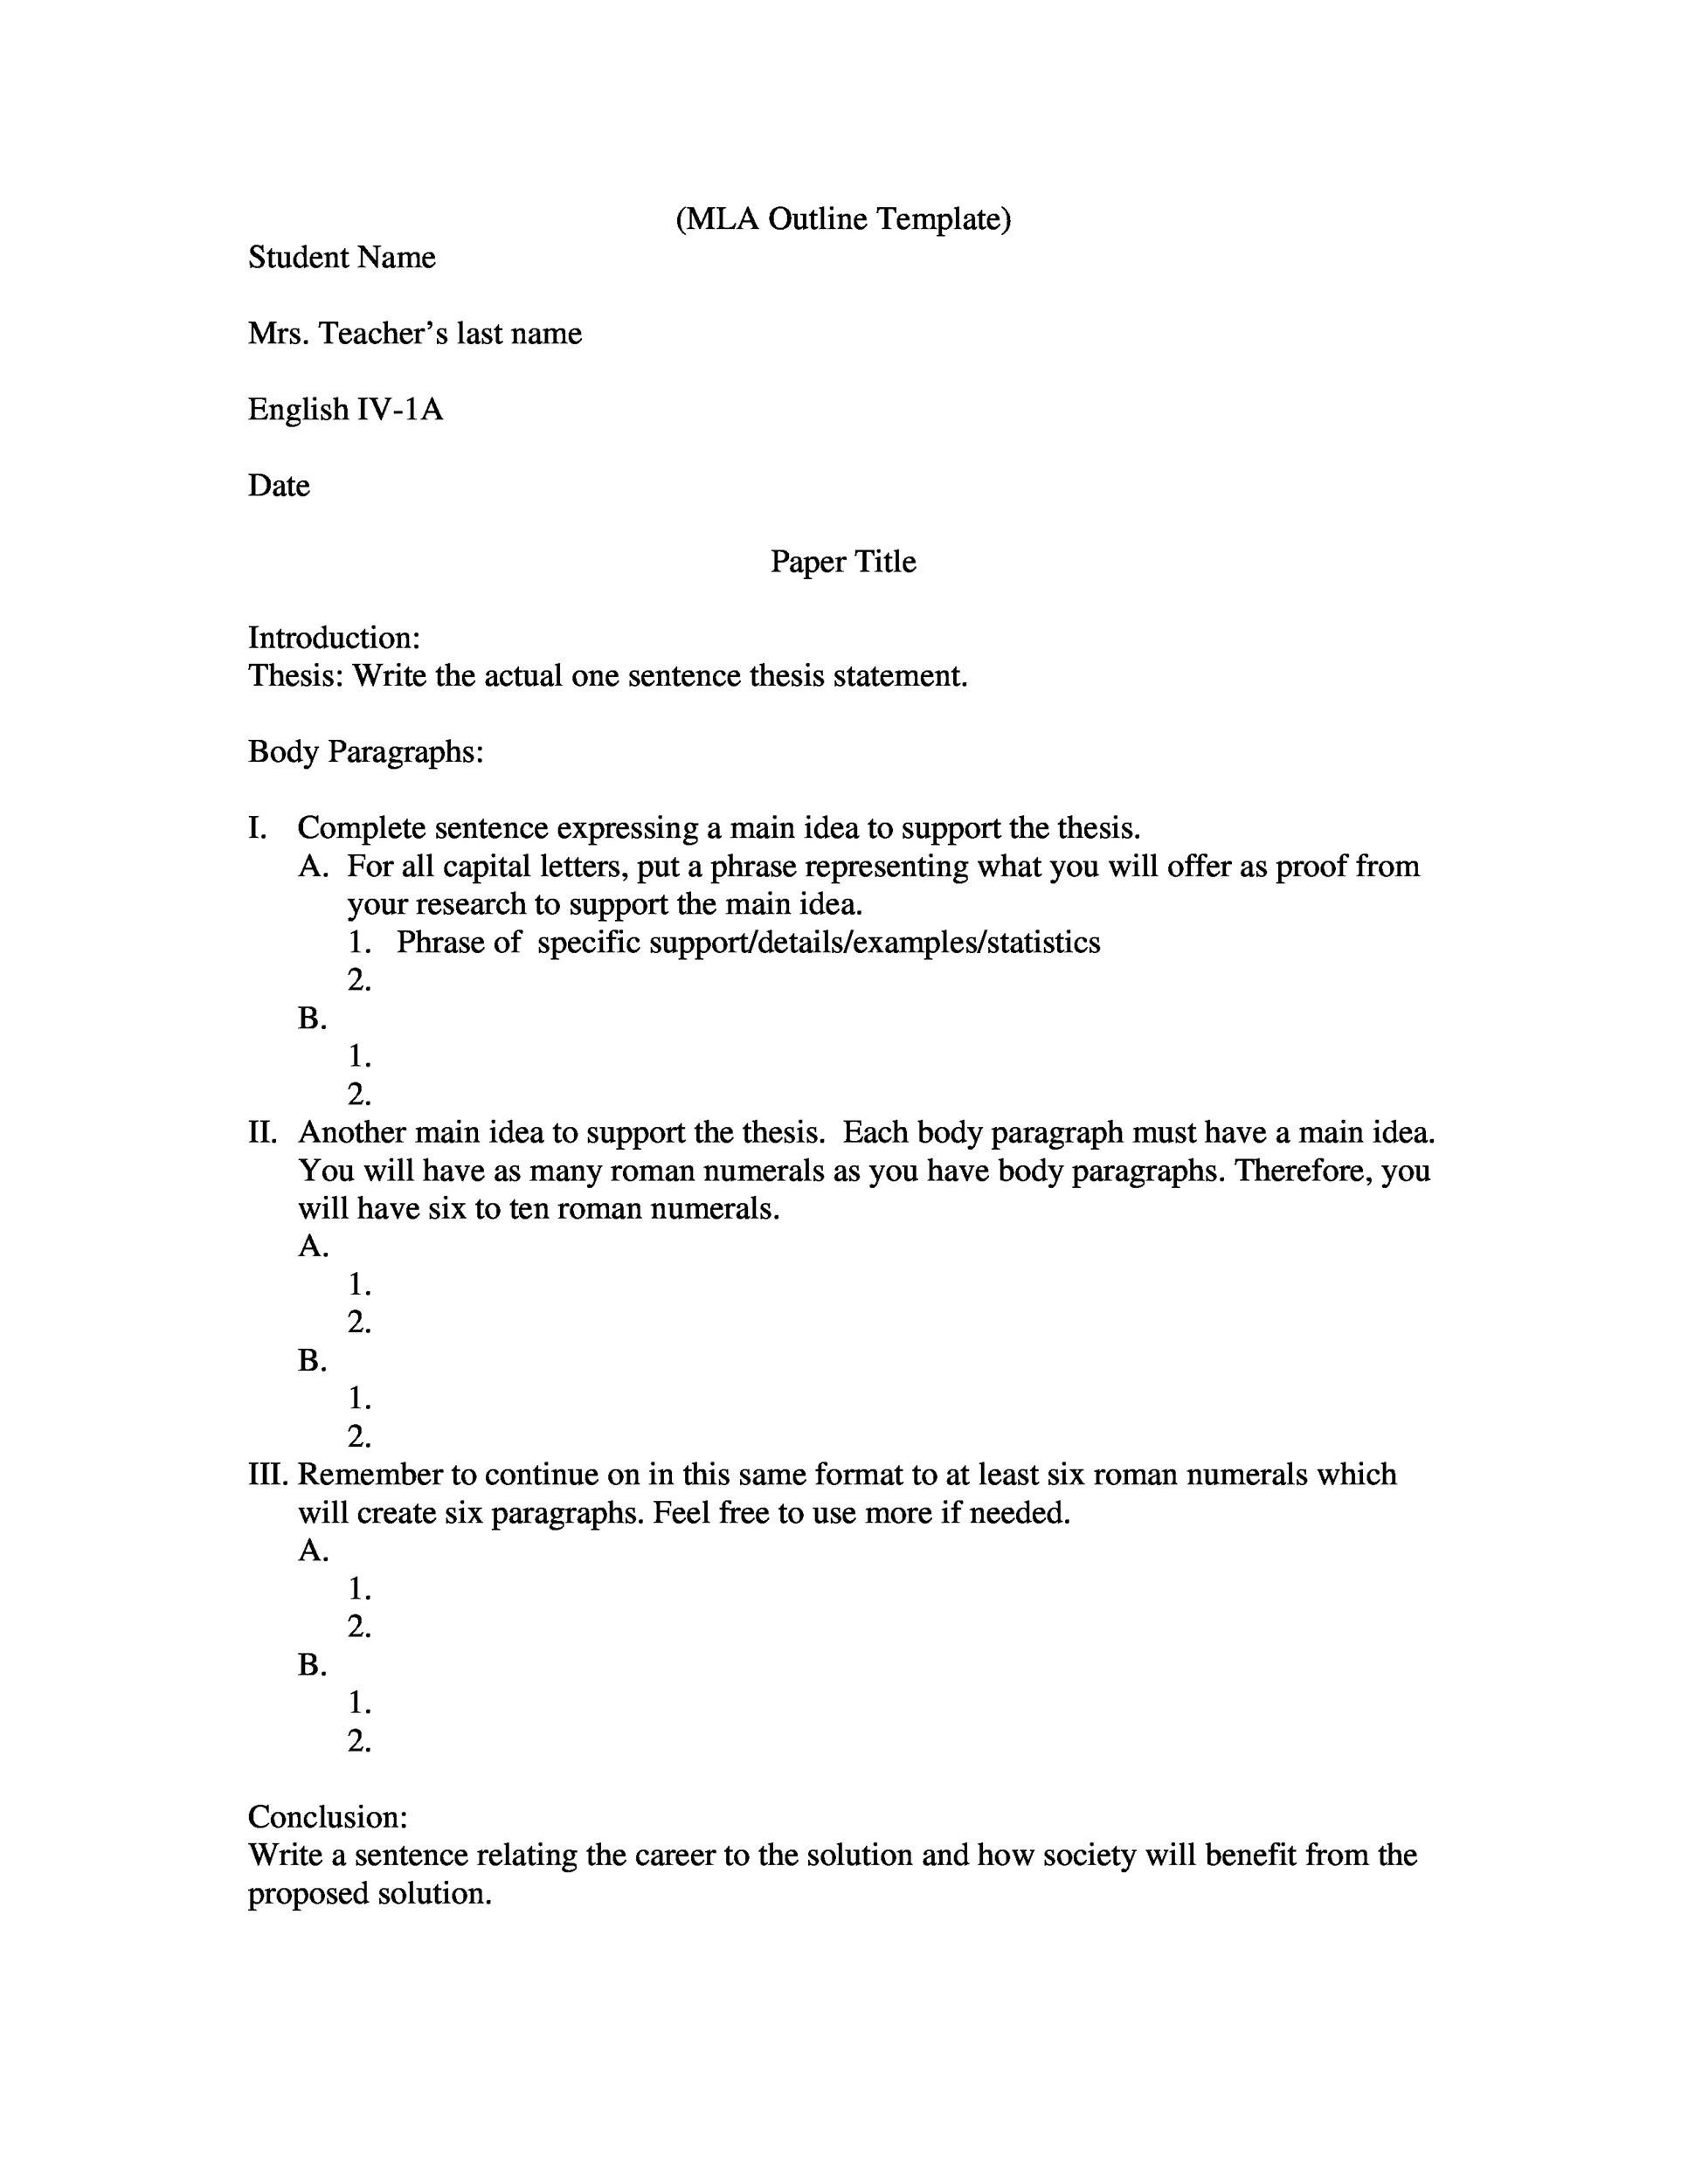 how to write a letter in mla format